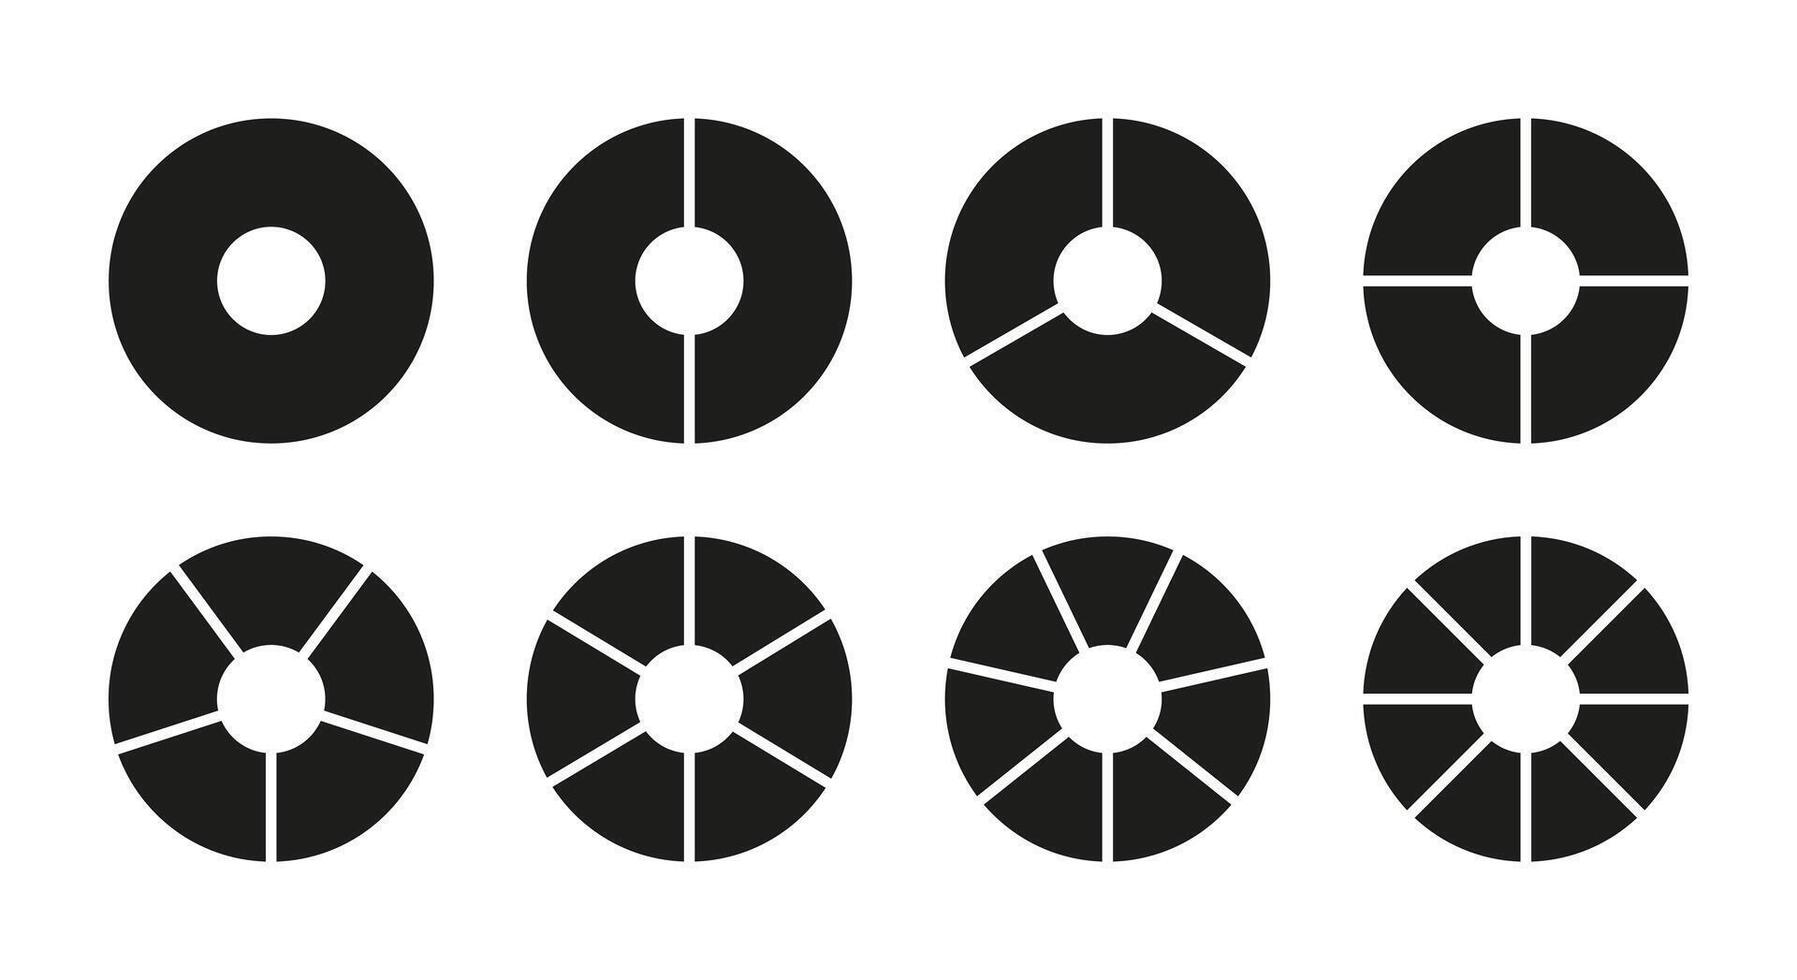 Circle division on 1, 2, 3, 4, 5, 6, 7, 8 equal parts. Wheel divided diagrams with one, two, three, four, five, six, seven, eight segments. Infographic vector set. Coaching blank. Circle section graph